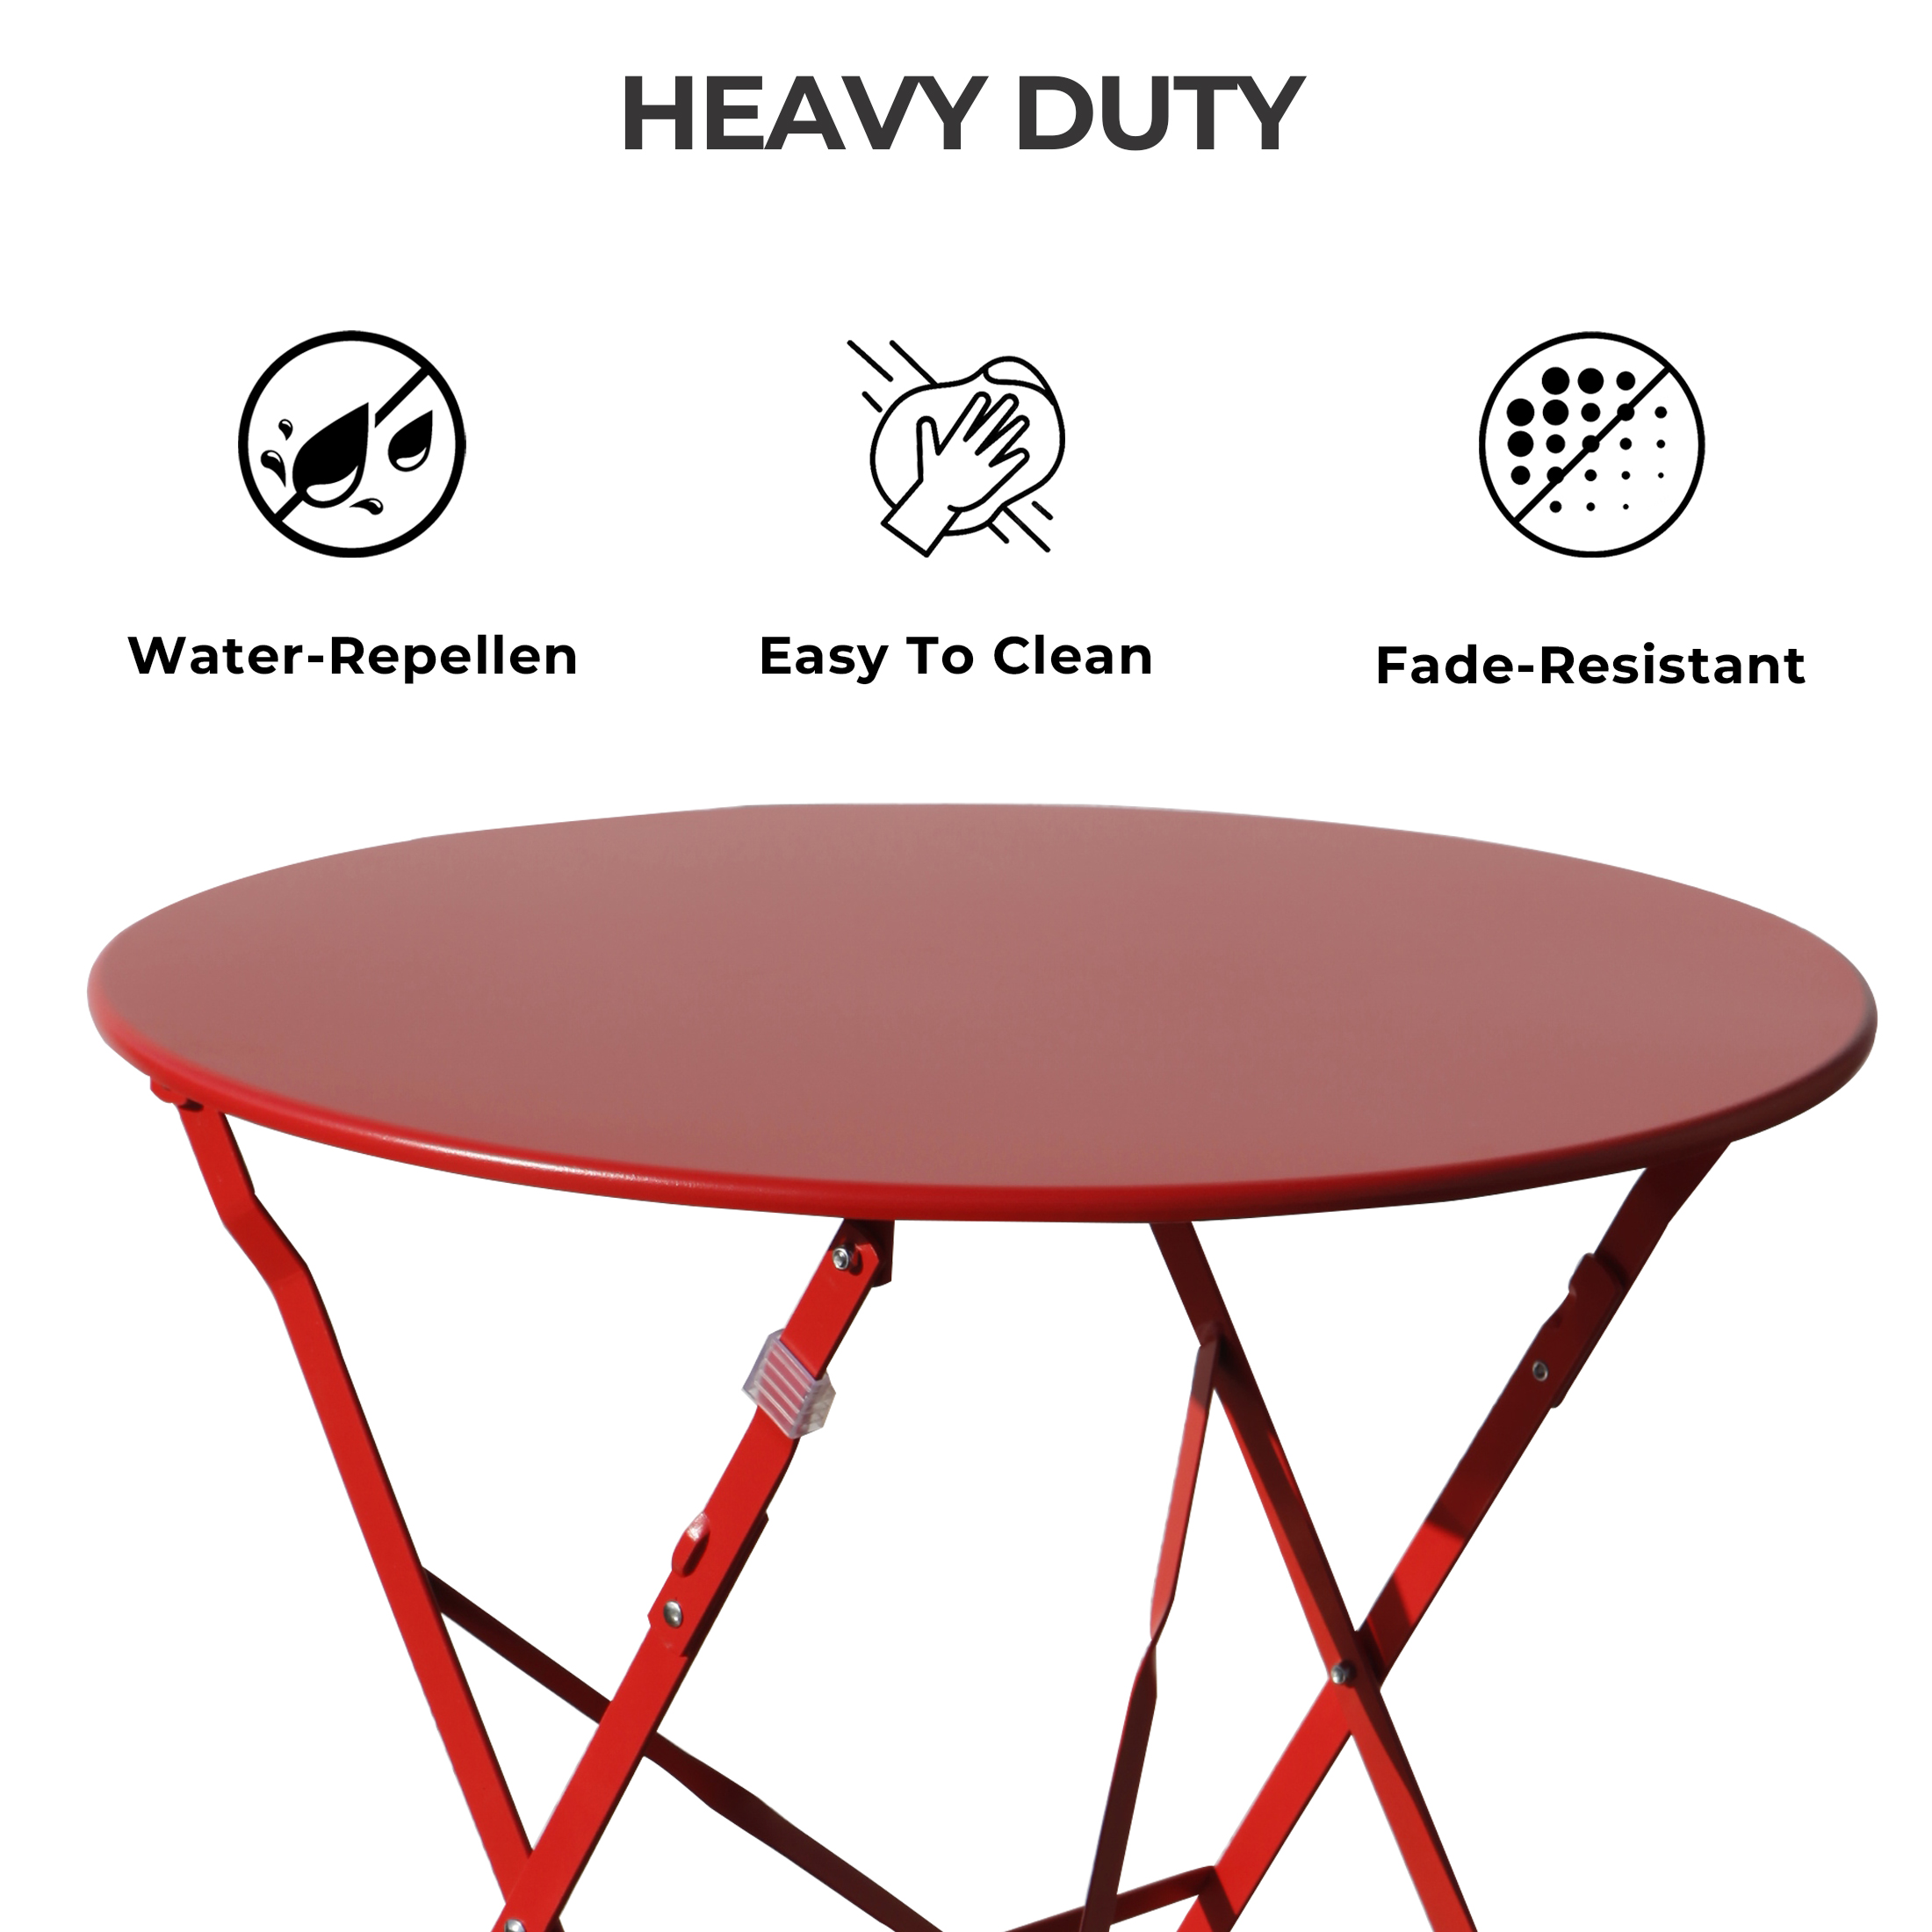 Grand Patio Metal 3-Piece Folding Bistro Table and Chairs Set, Outdoor Patio Dining Furniture for Small Spaces, Balcony, Red - image 3 of 11